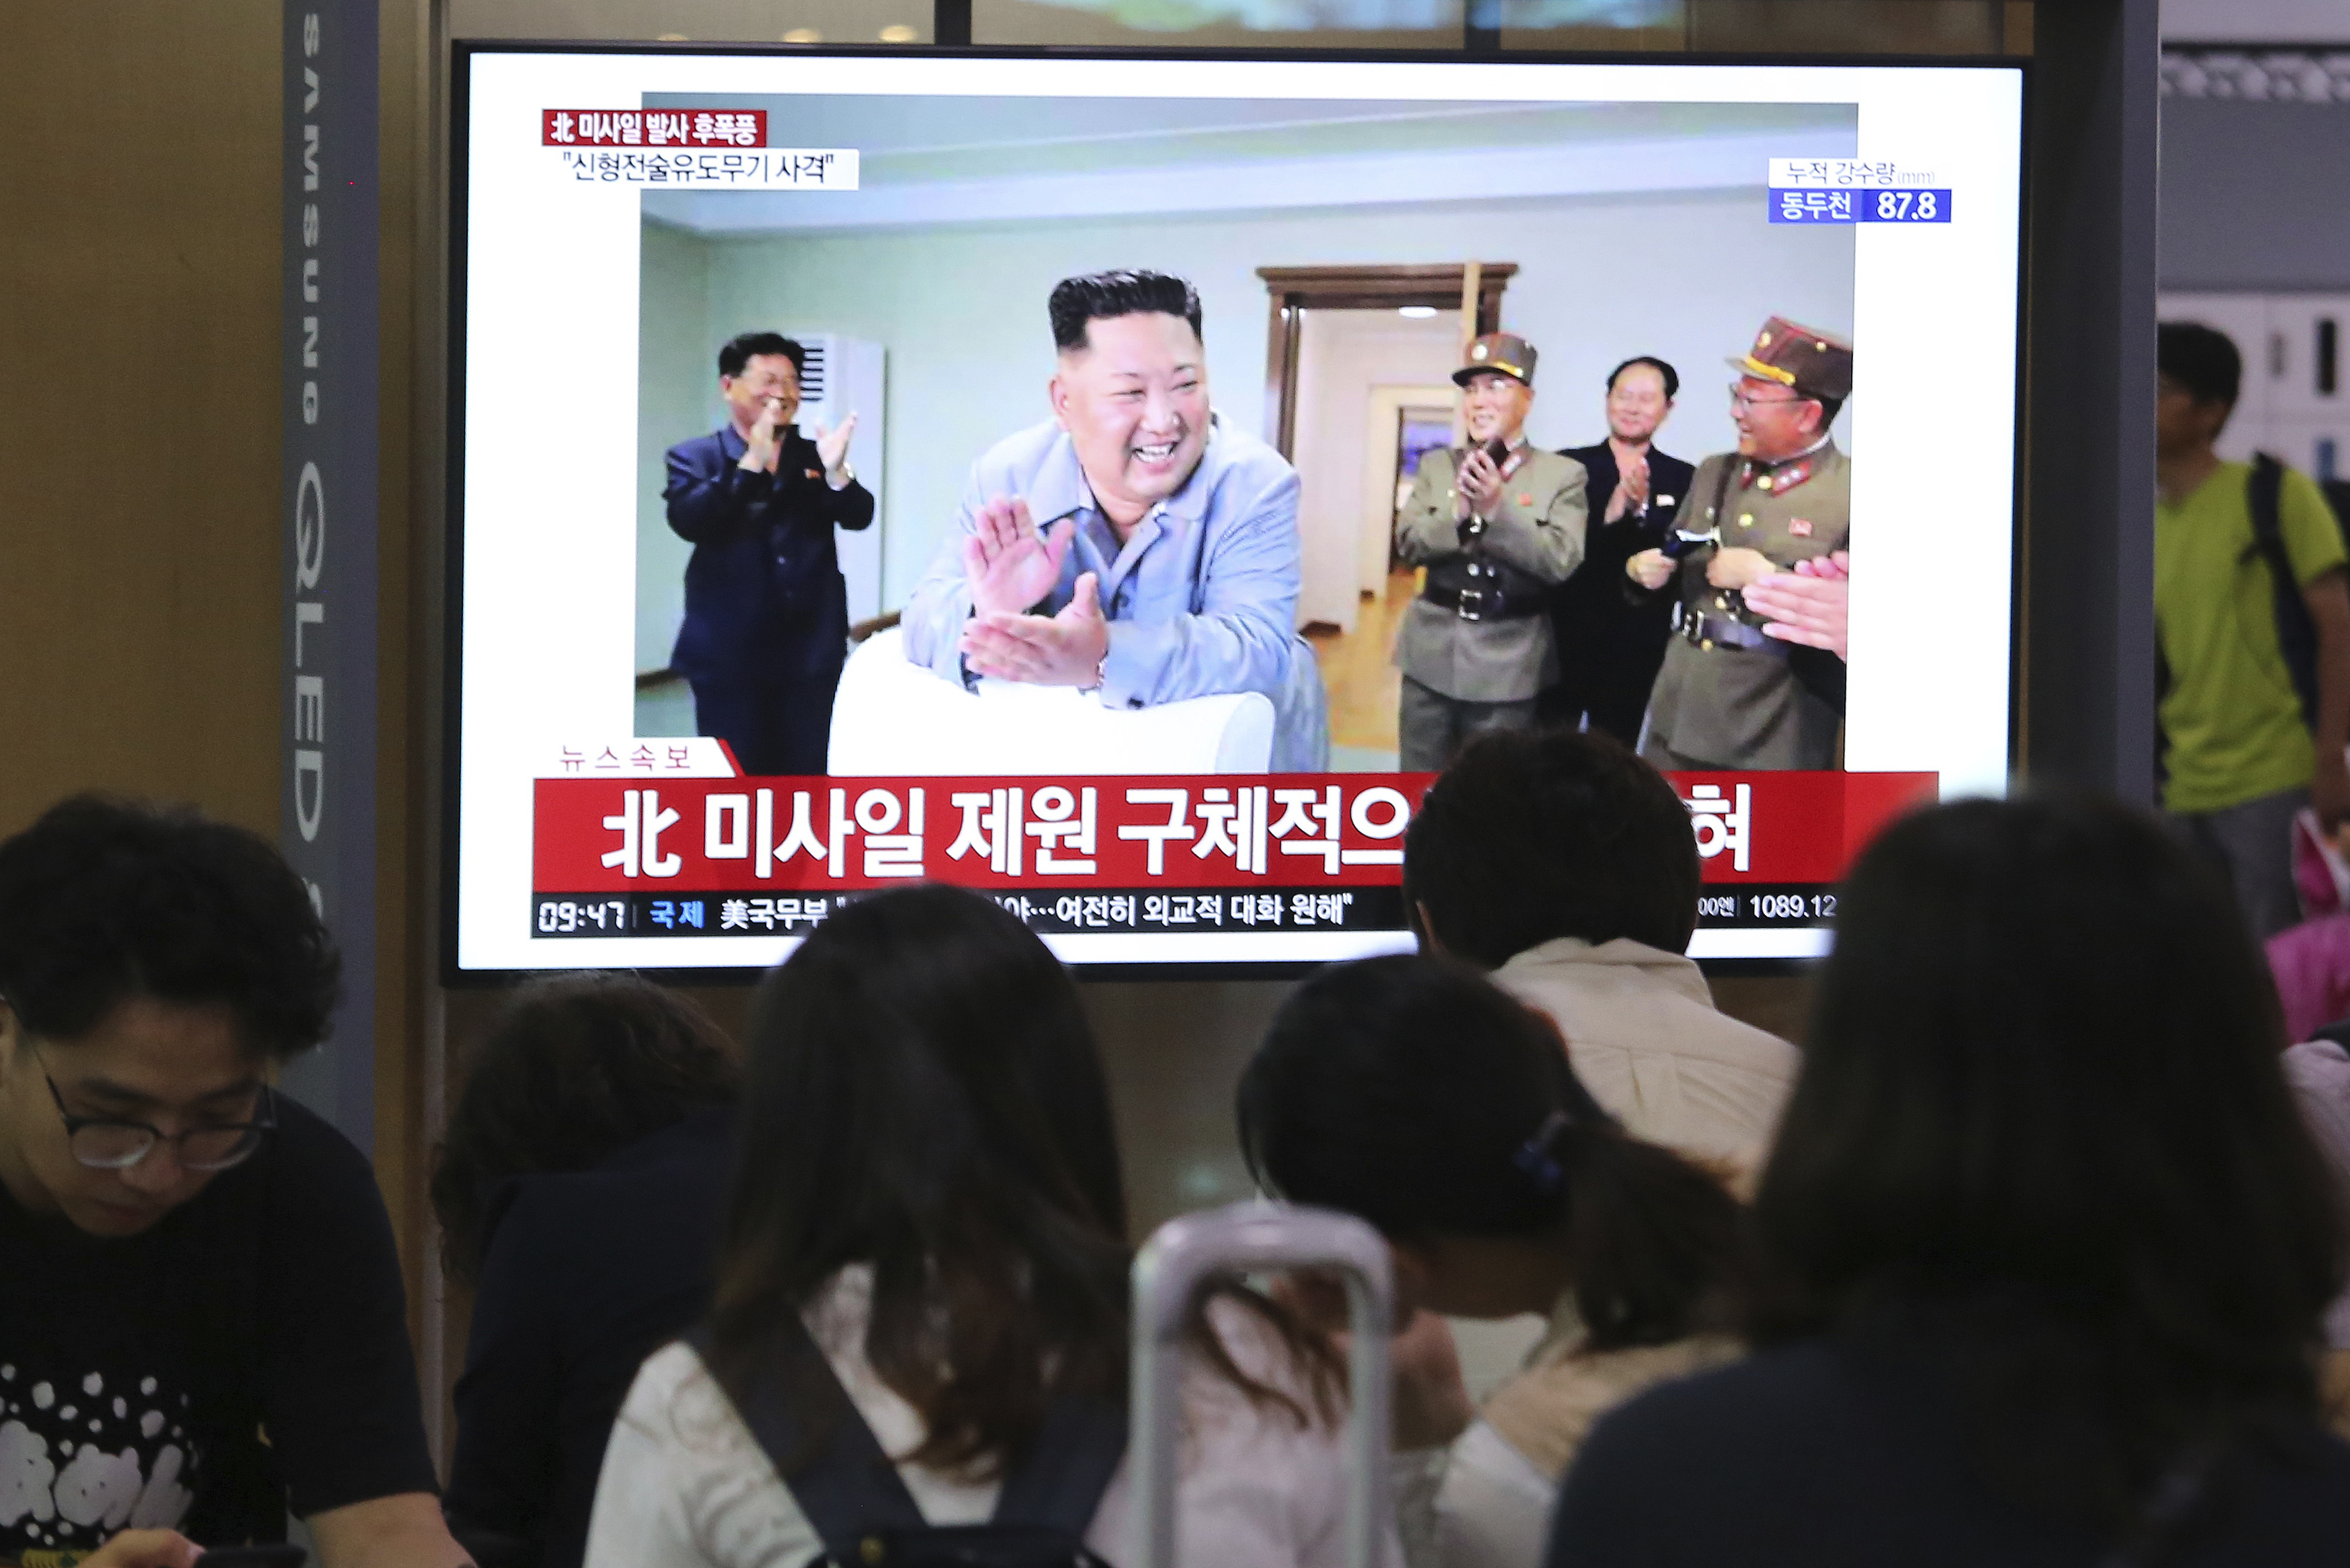 People watch a TV showing an image of North Korean leader Kim Jong Un during a news program at the Seoul Railway Station in Seoul, South Korea, Friday, July 26, 2019. A day after two North Korean missile launches rattled Asia, the nation said Friday it had tested a 